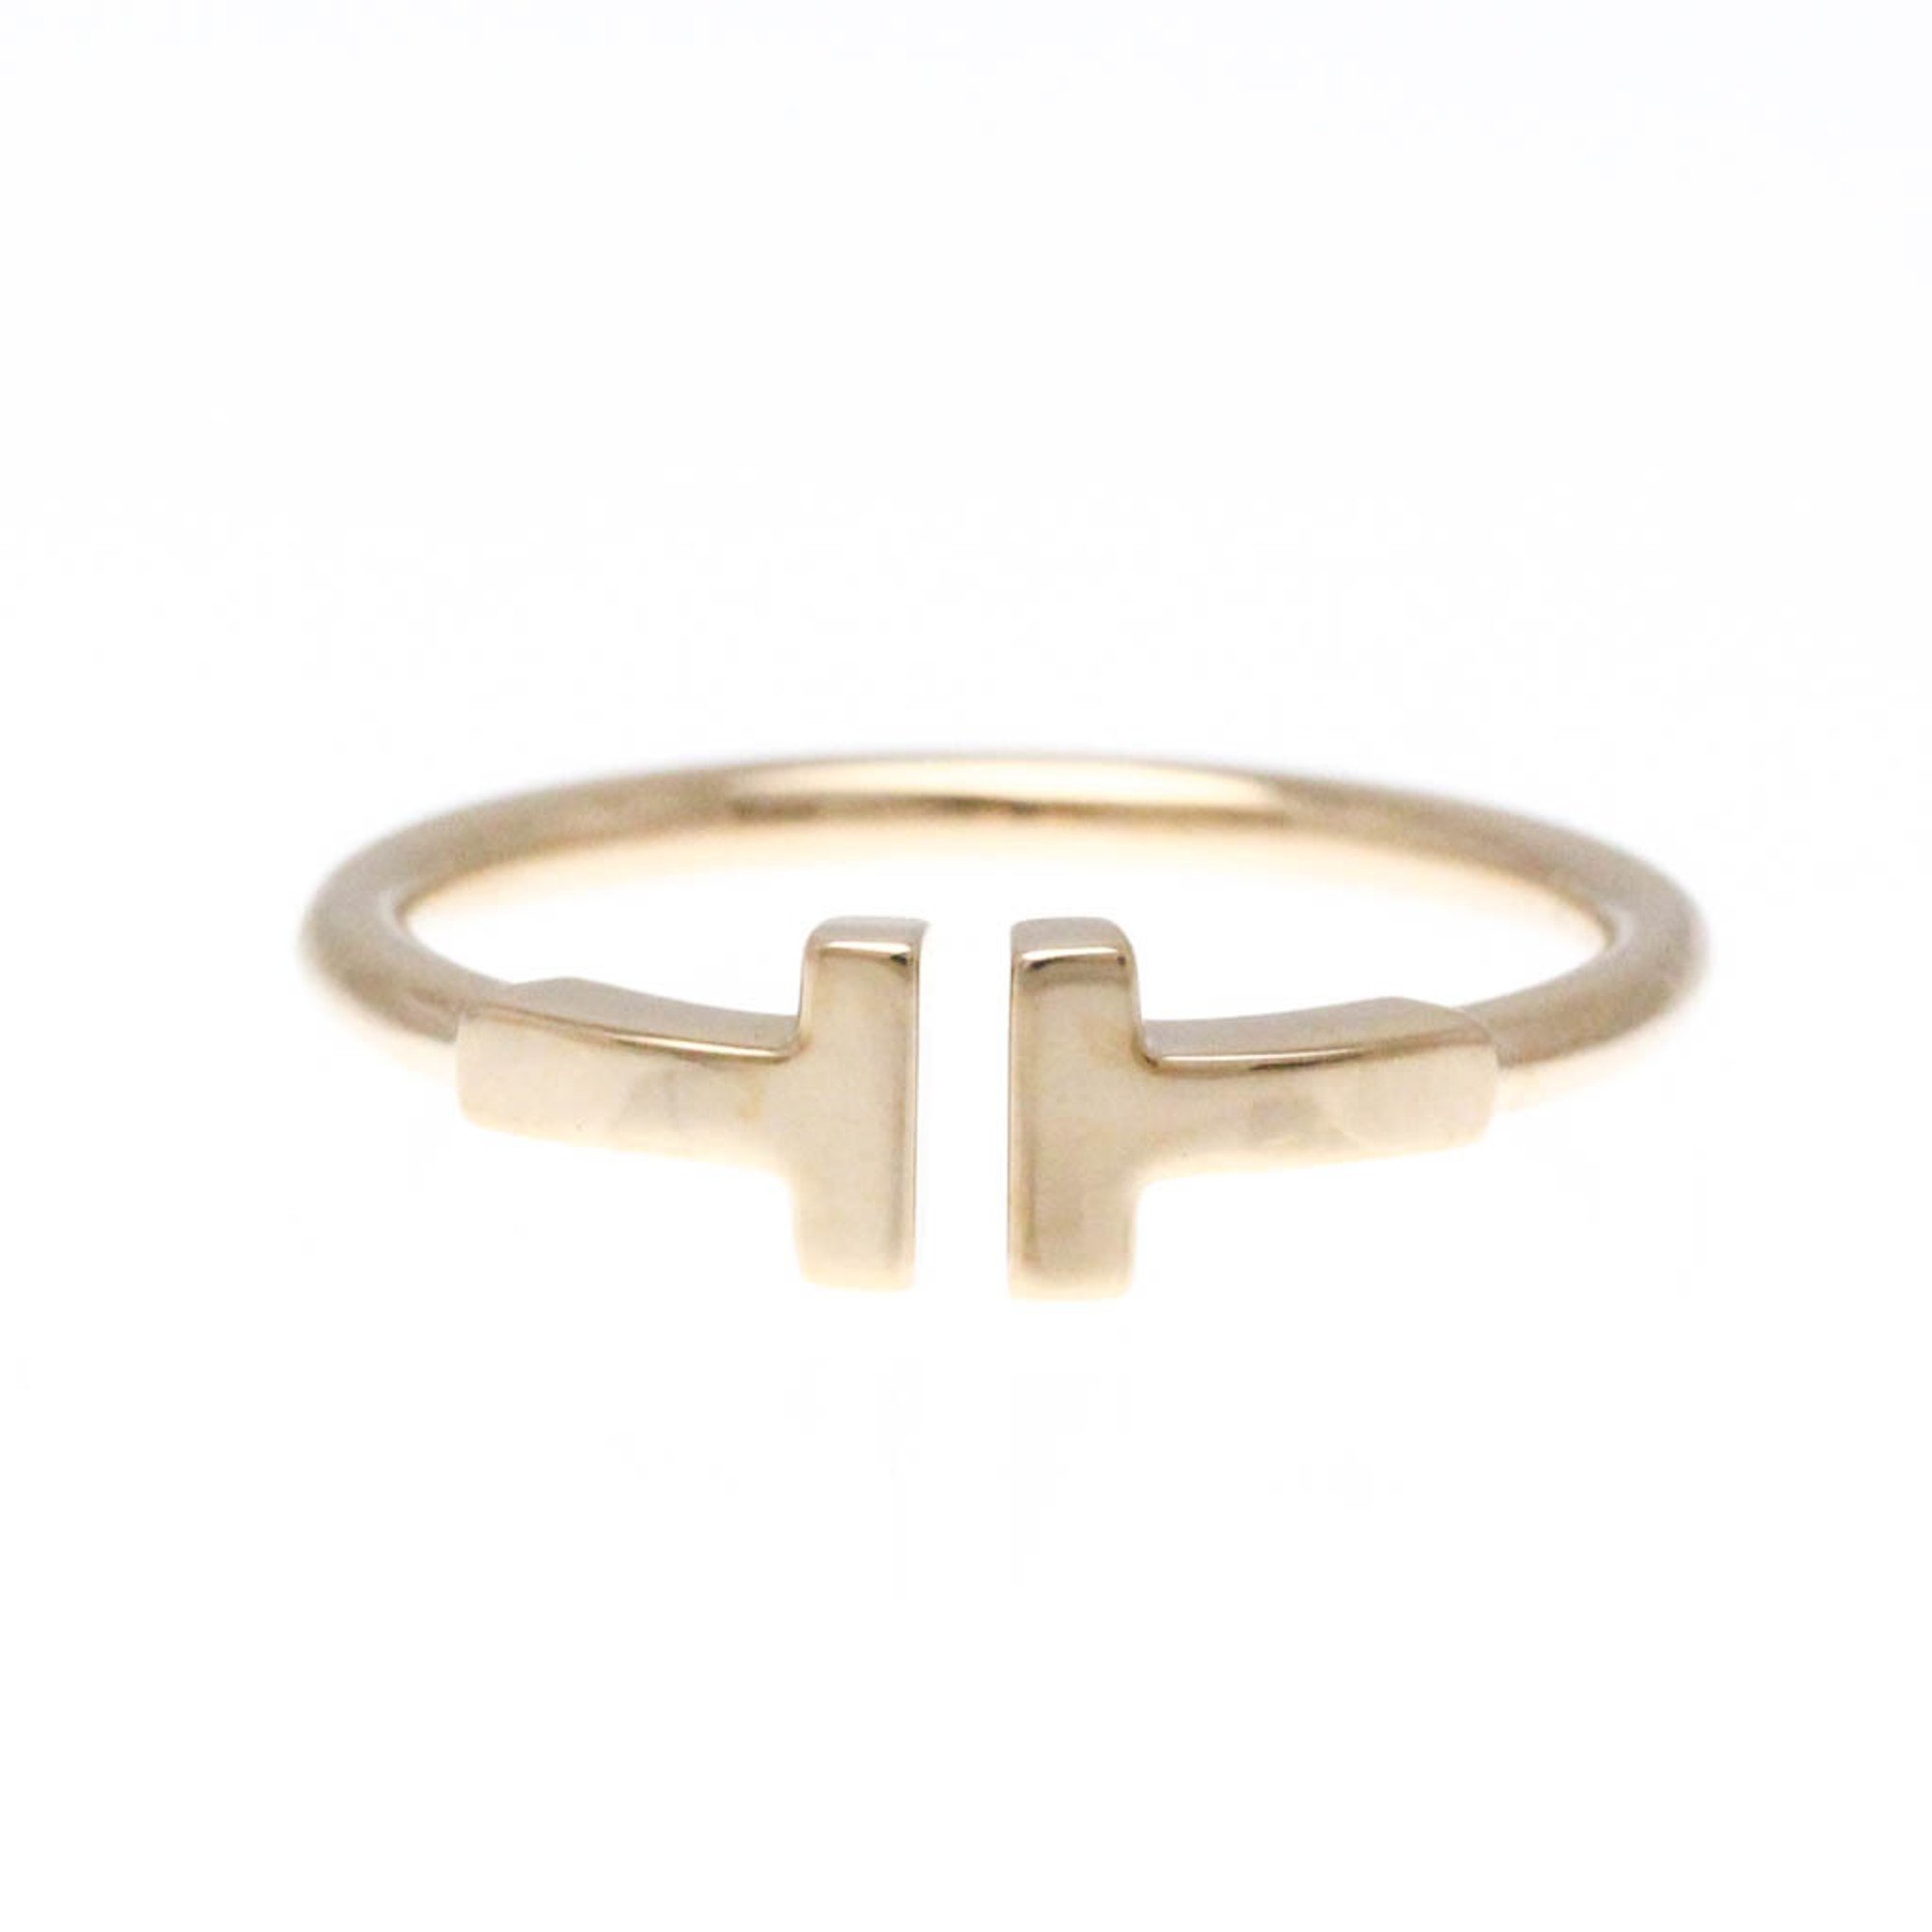 Tiffany T Wire Ring Pink Gold (18K) Fashion No Stone Band Ring Pink Gold